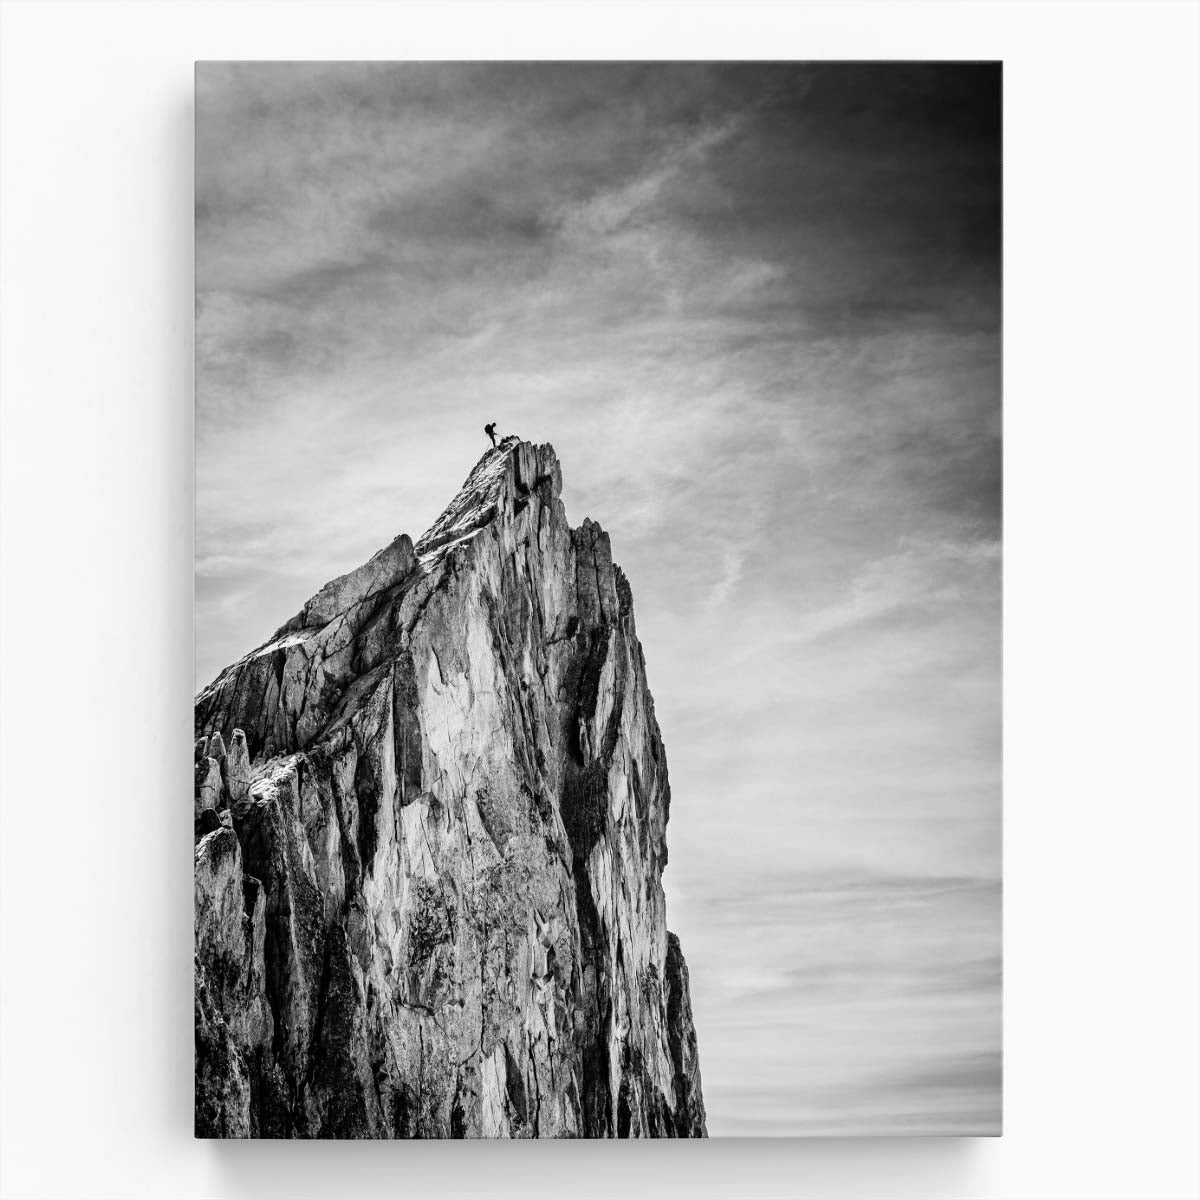 Adrenaline-Filled Mountain Climbing Adventure, Monochrome Hiker Photography Art by Luxuriance Designs, made in USA